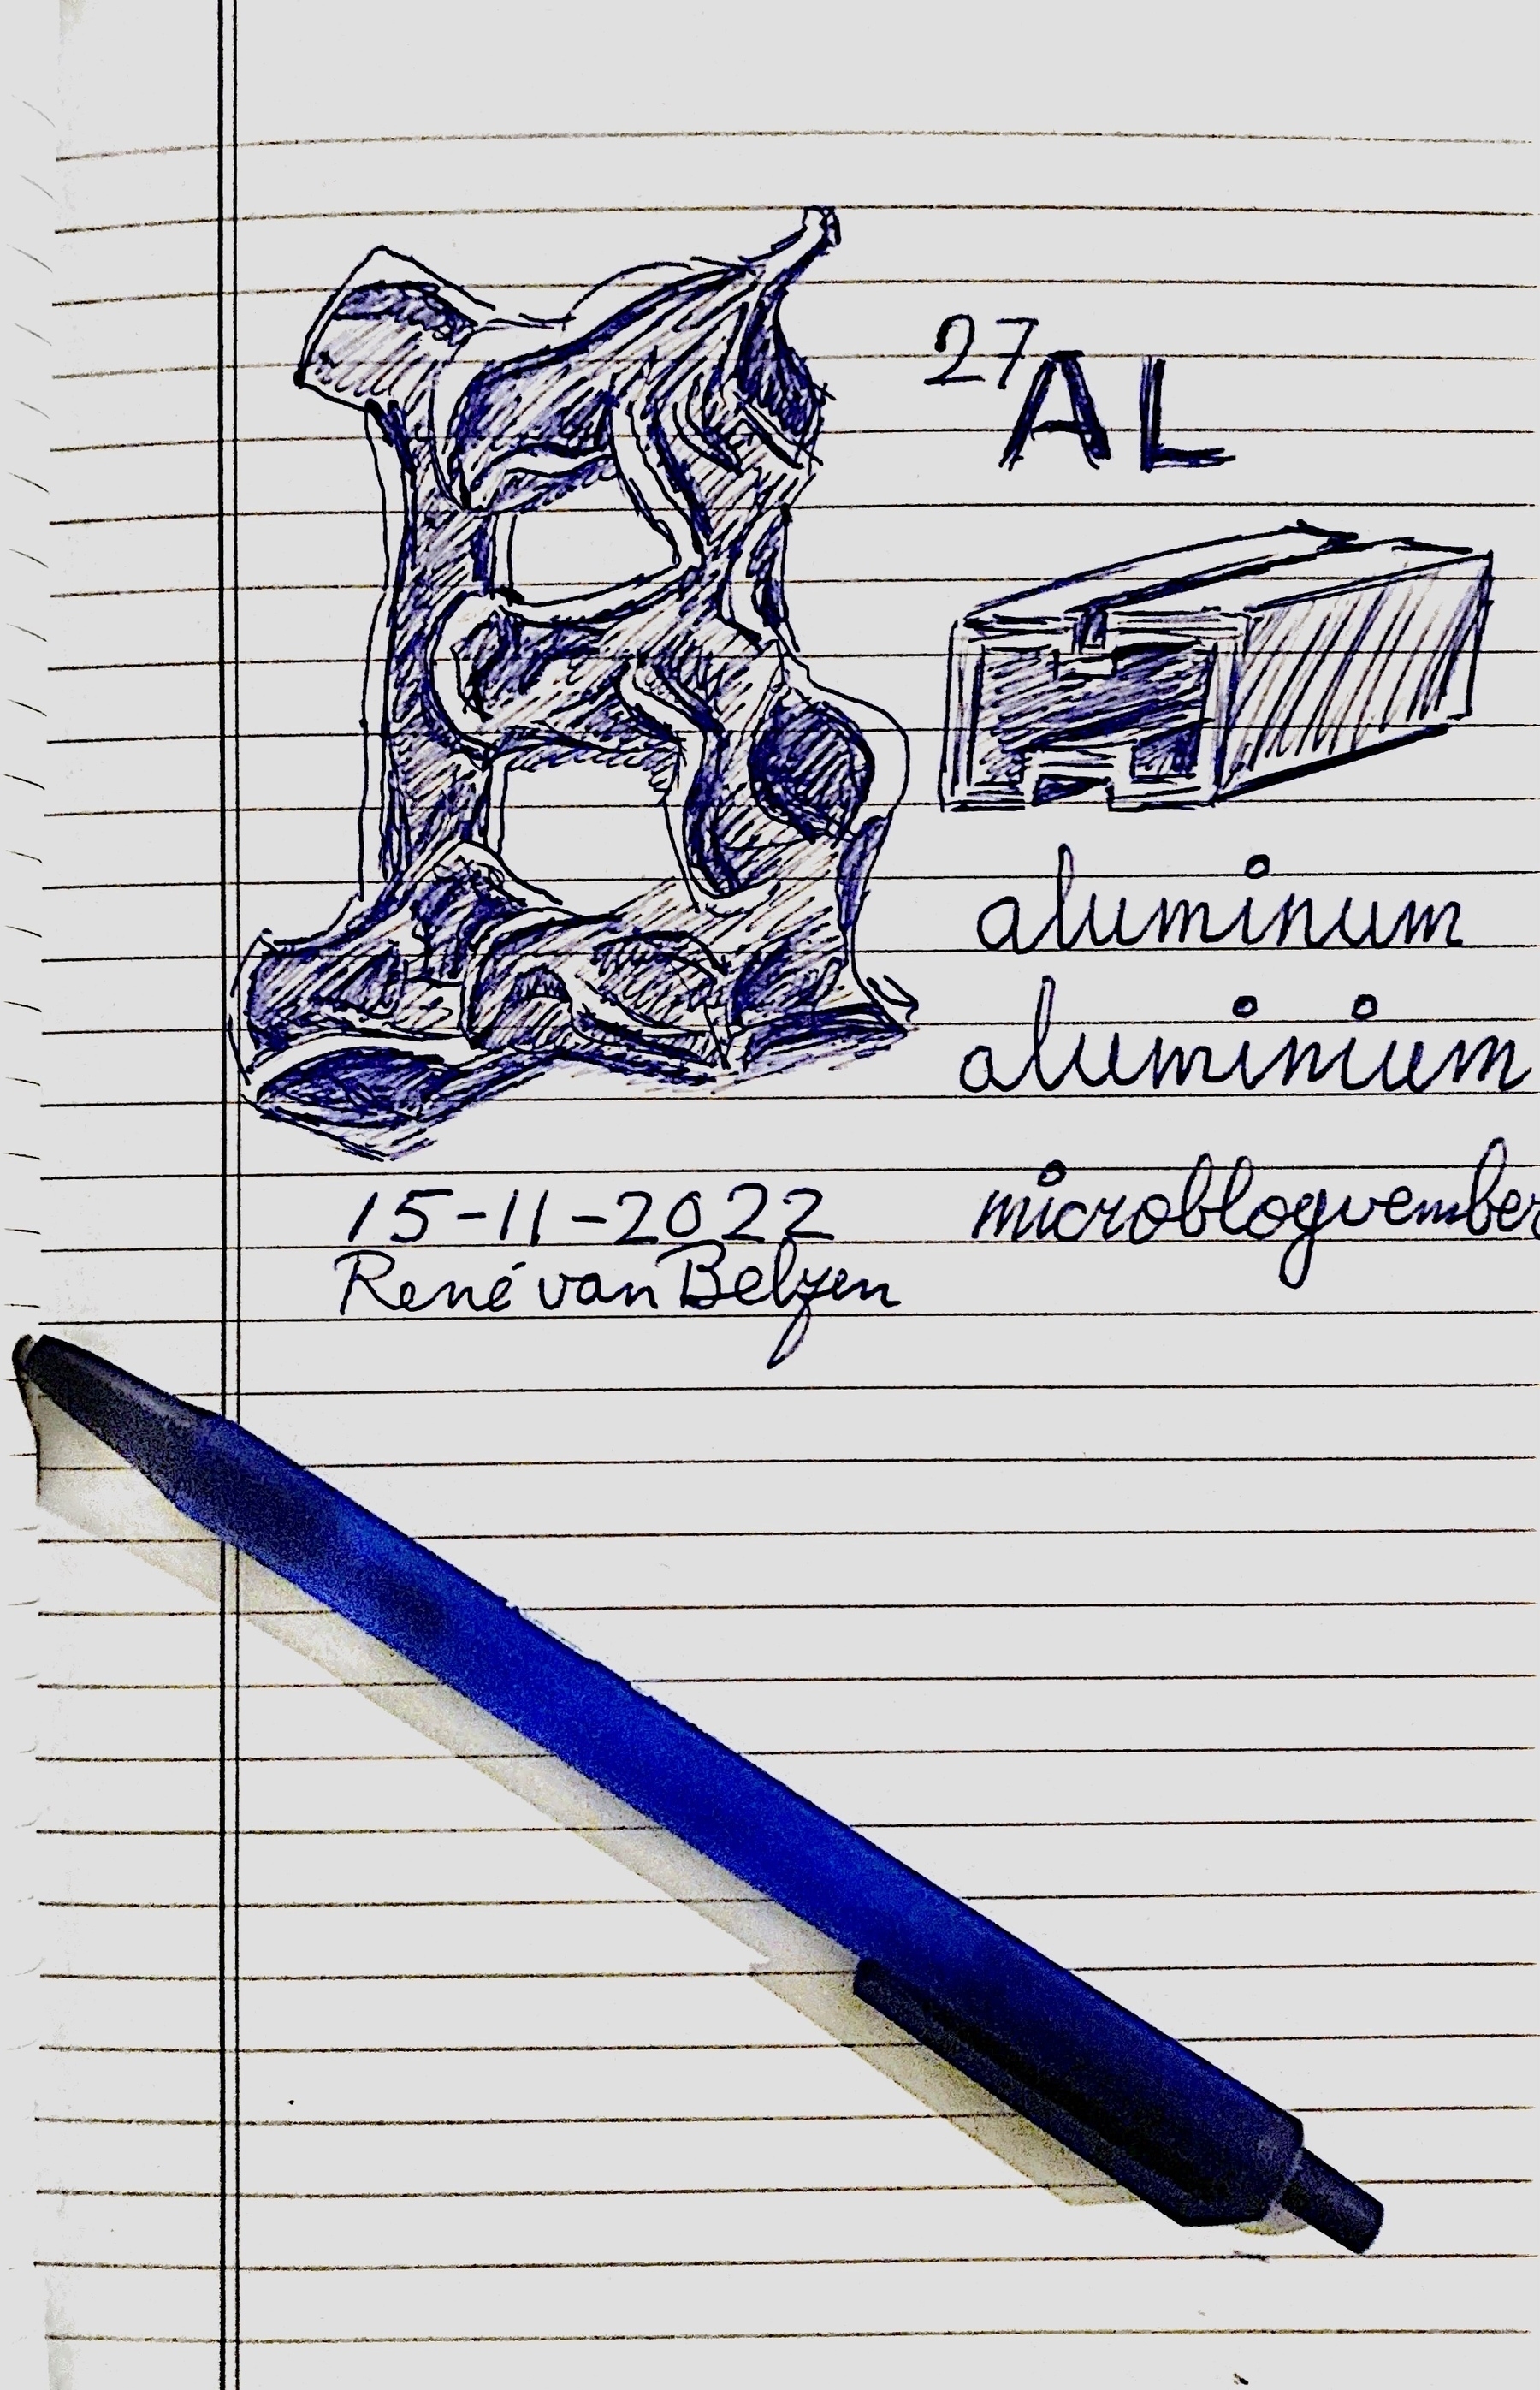 ballpoint sketch of a 13 in aluminium foil, isotope 27 Al and the two accepted spellings of the element